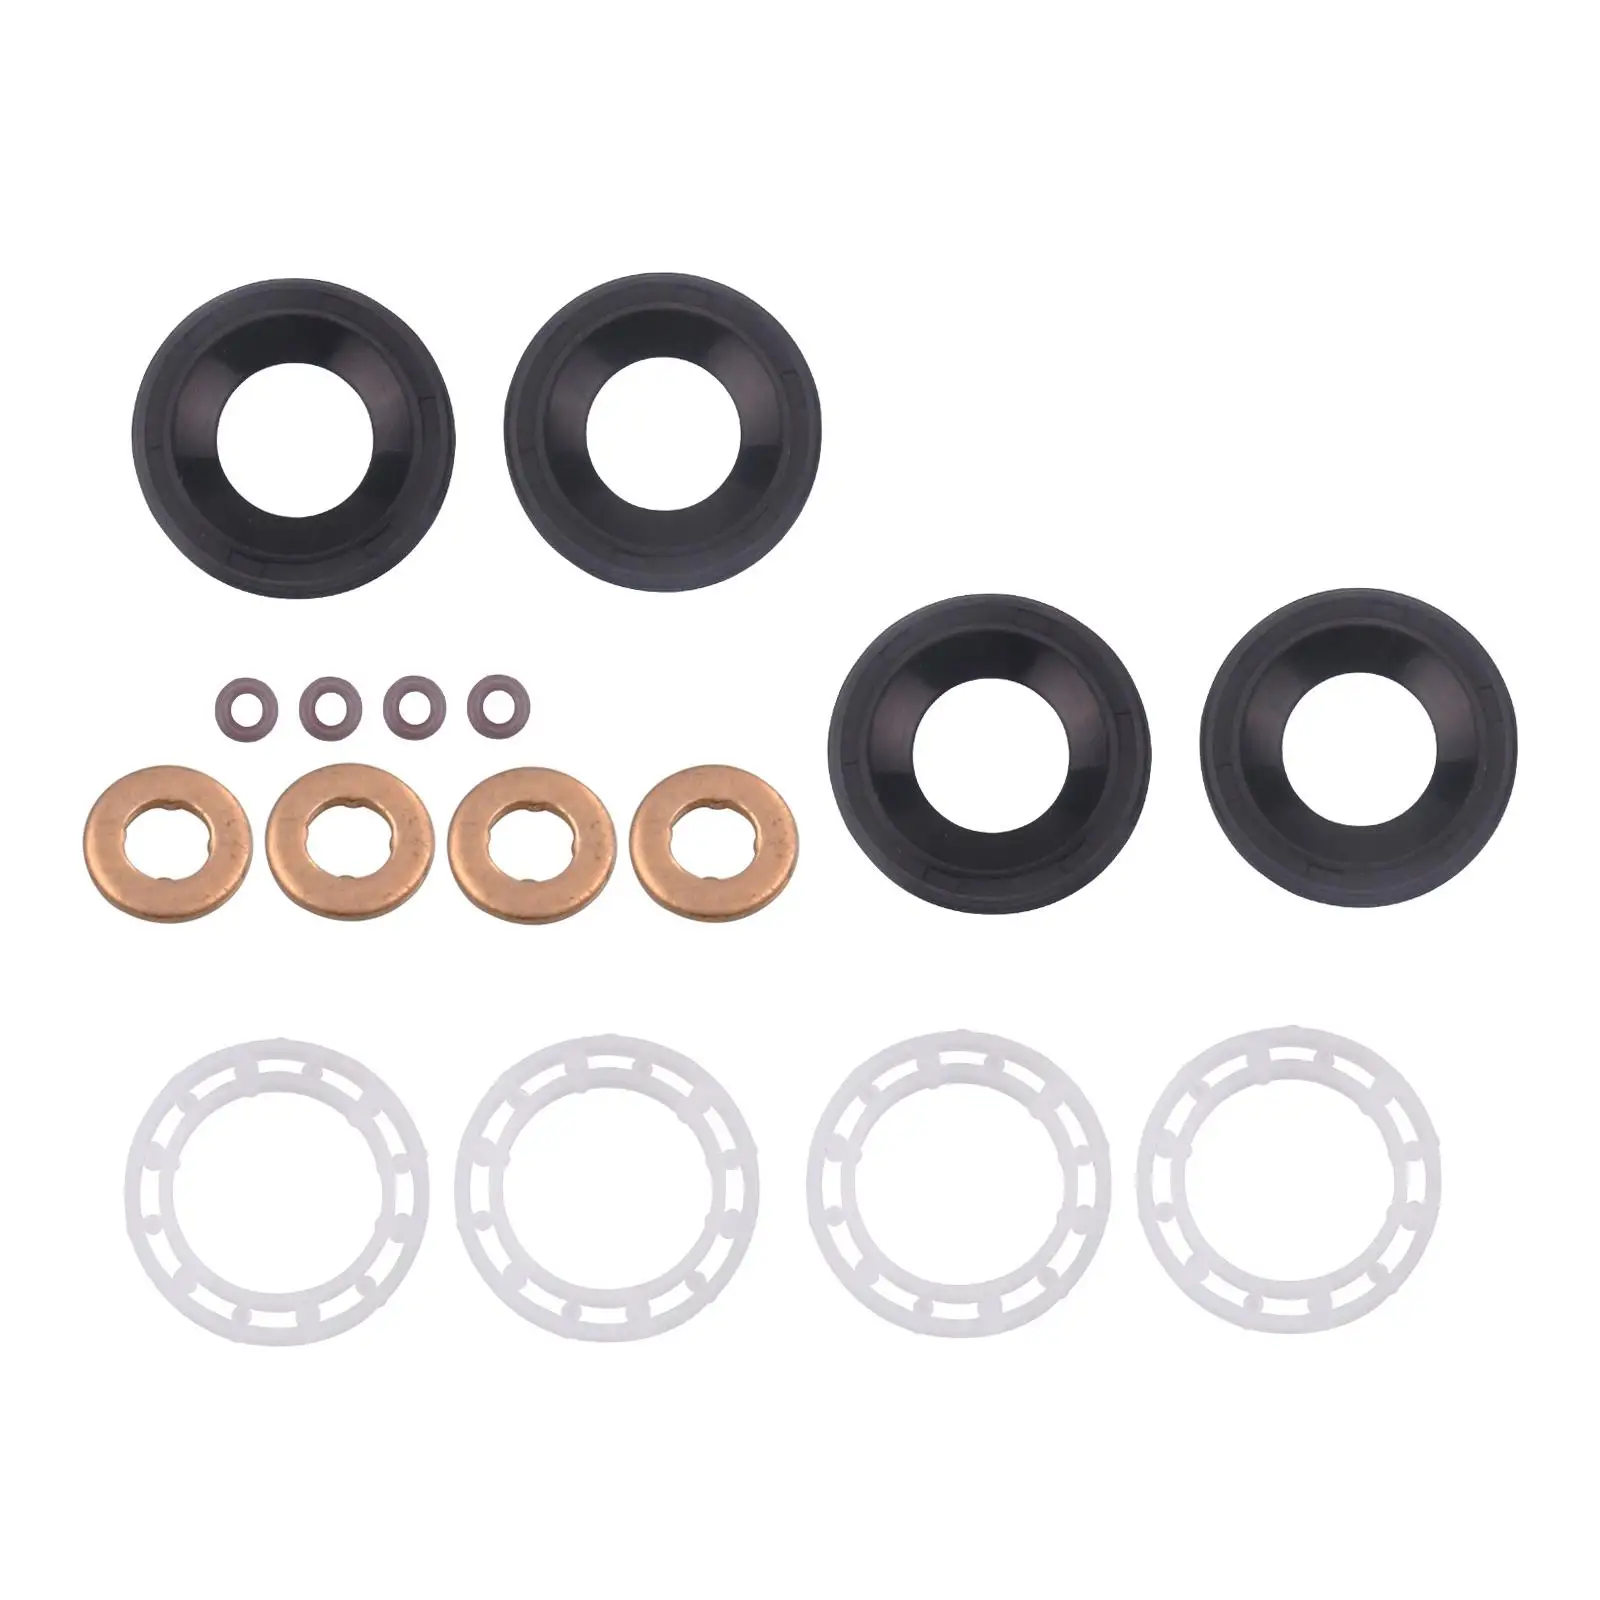 Diesel injectors Seals Protectors Portable 1982A0 Copper Washers 1.6 Hdi Seal Washer Kit for Peugeot Citroen Direct Replaces